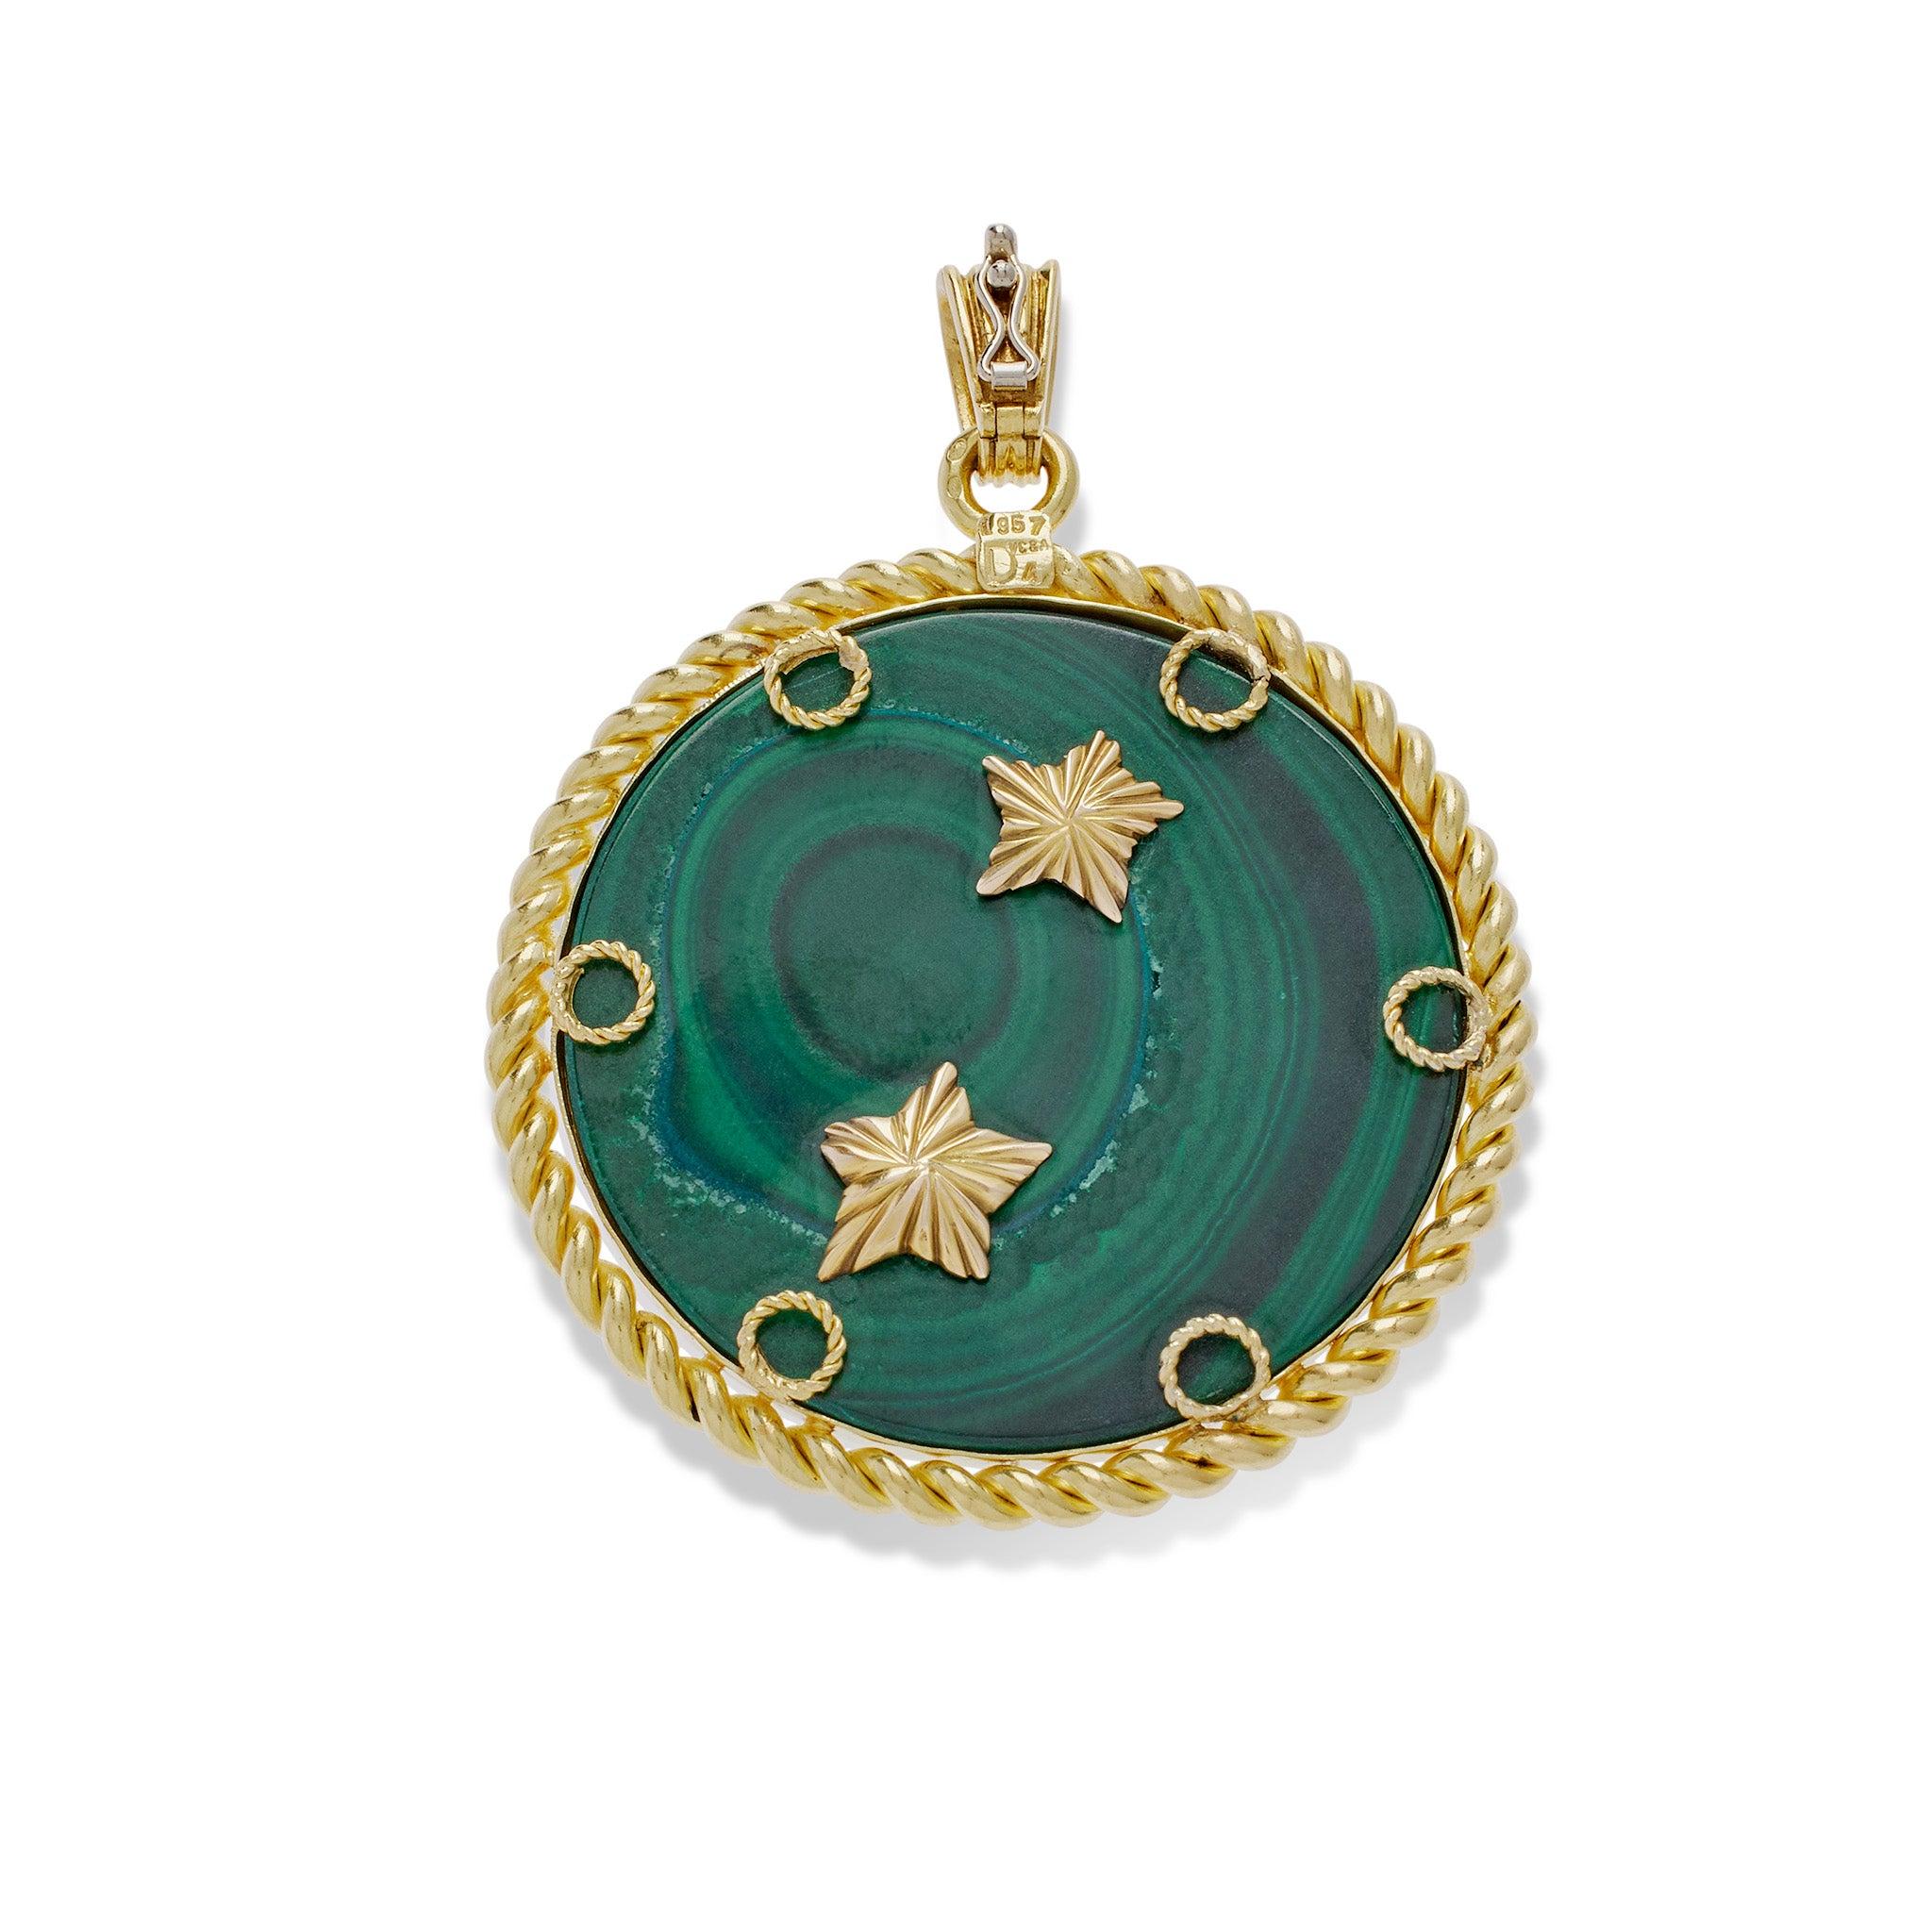 Dating from the 1970s, this Pisces pendant by Van Cleef & Arpels is composed of 18K gold, diamond, and emeralds. The ribbed bail suspends a circular pendant, within ropetwist frame, depicting a pair of fish in high relief textured 18K gold, with